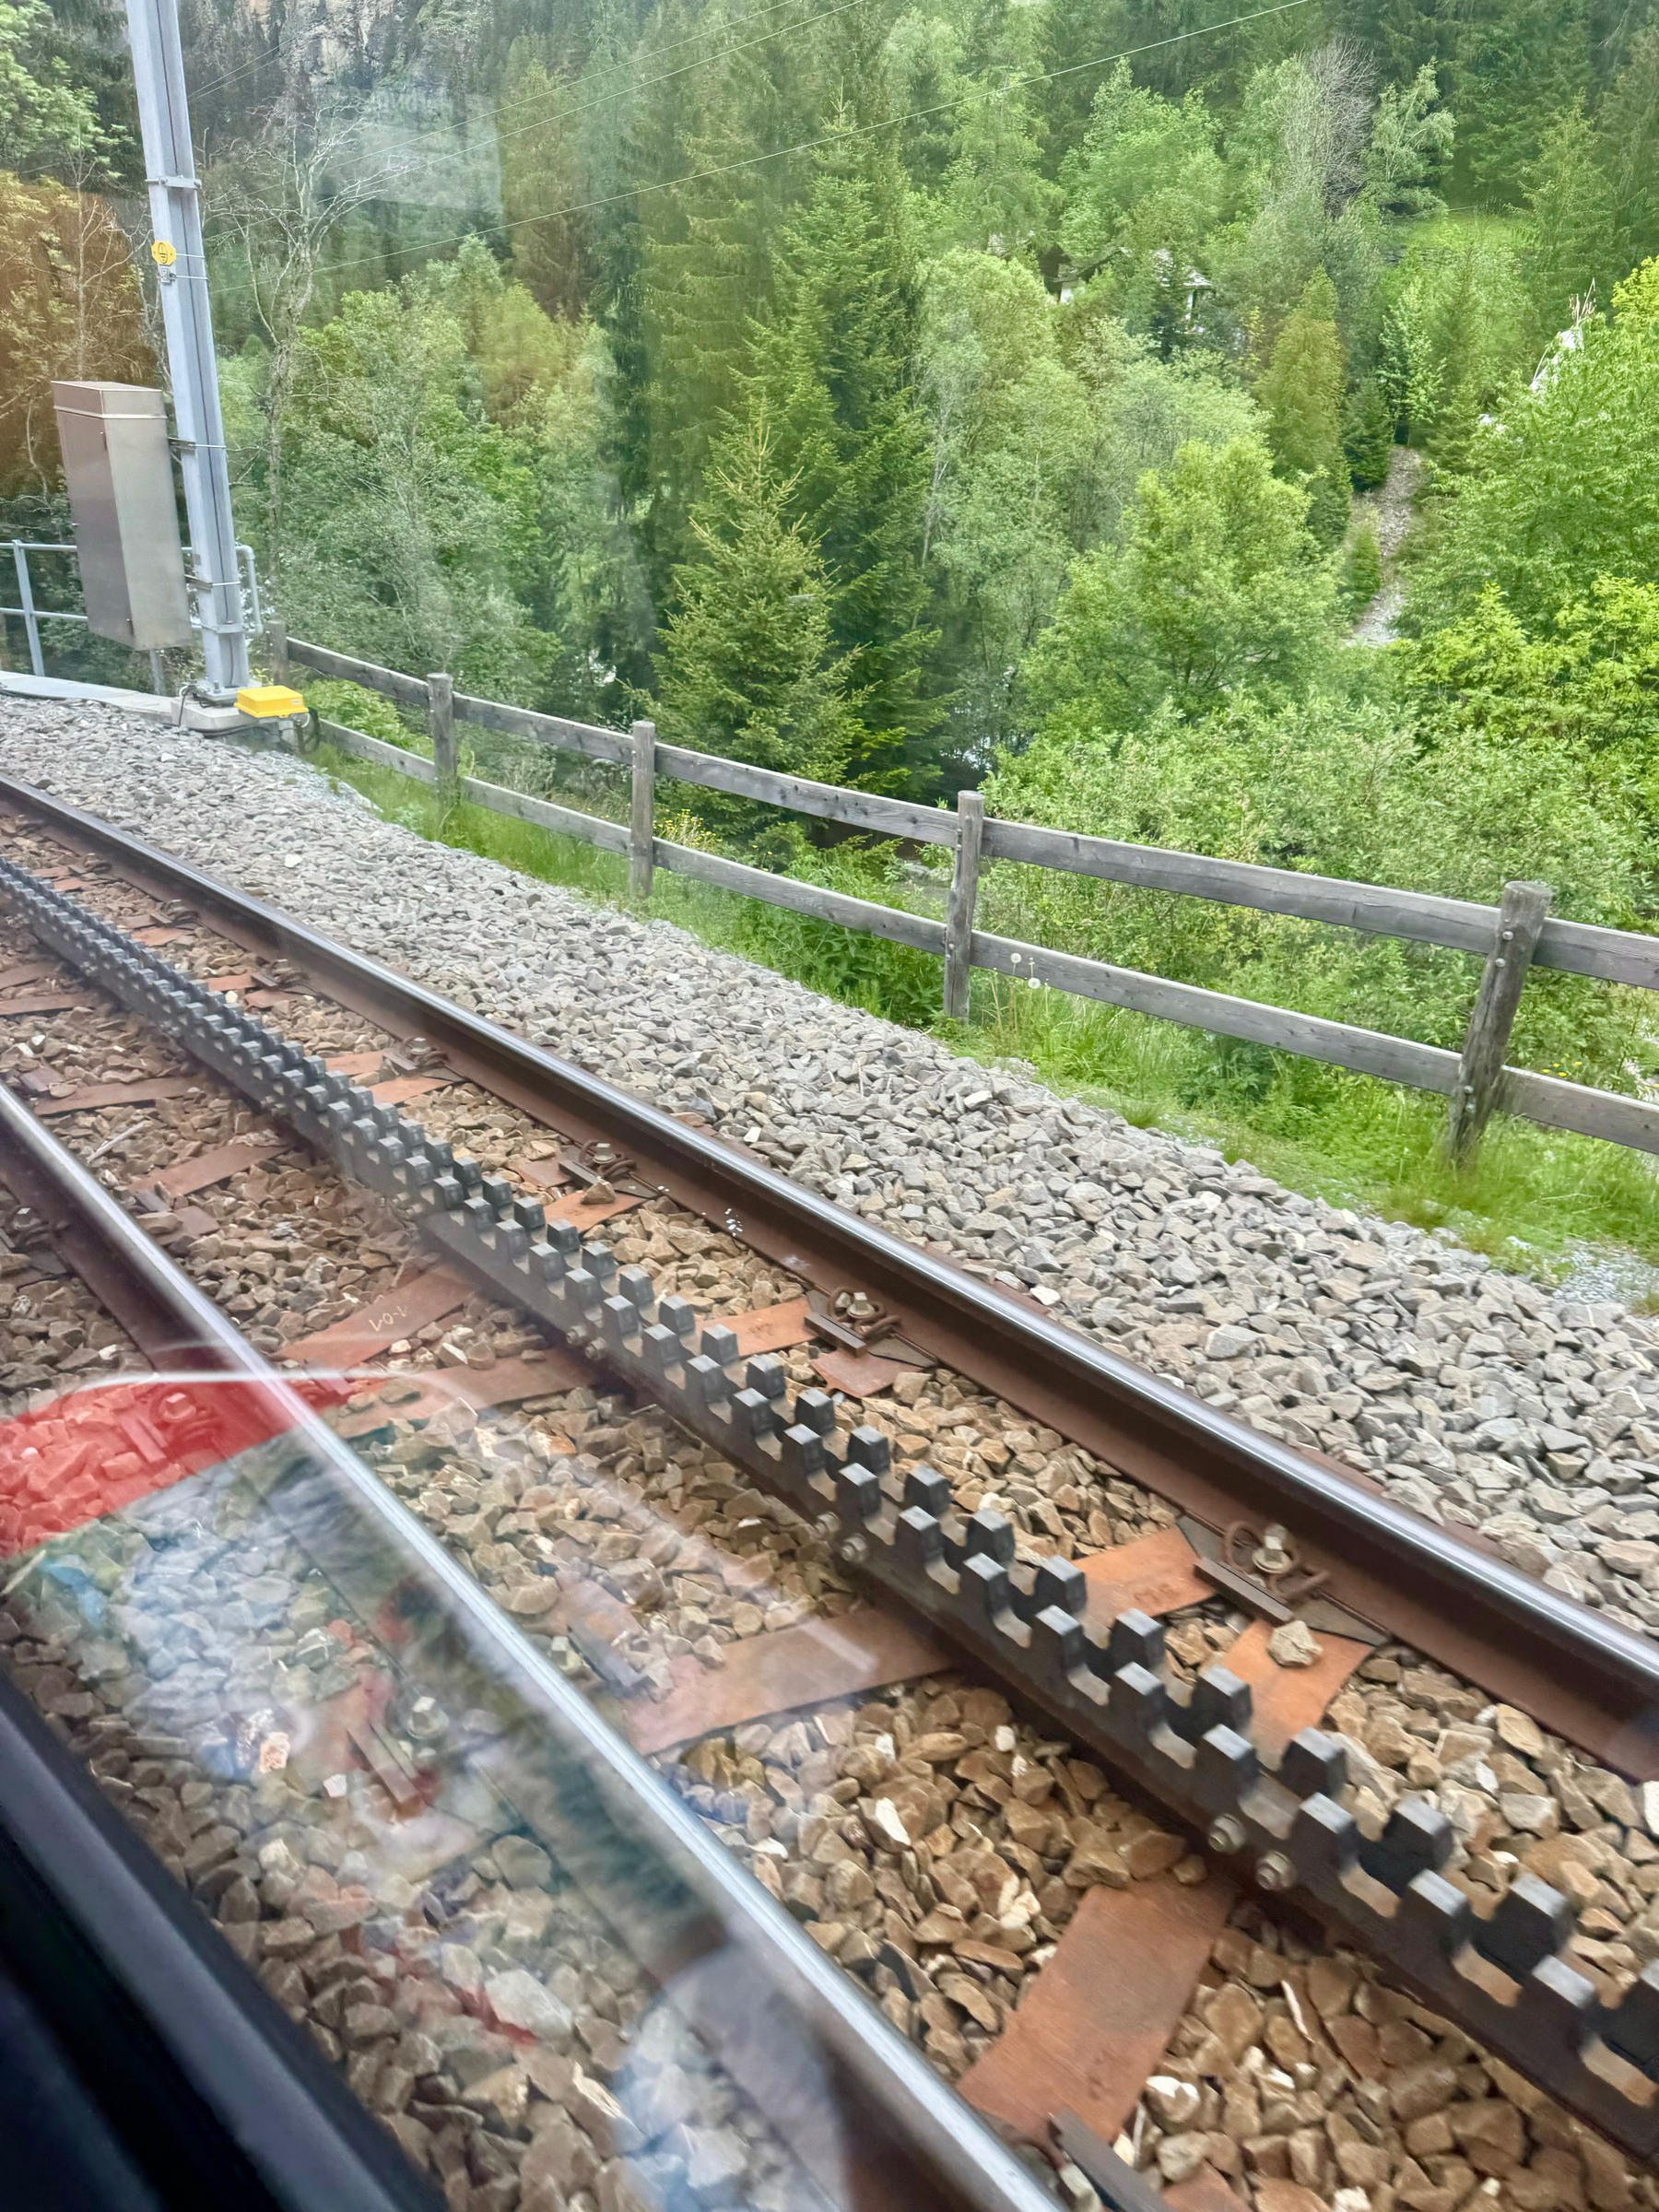 View from a train window showing train tracks with cogs and lush green trees in the background.